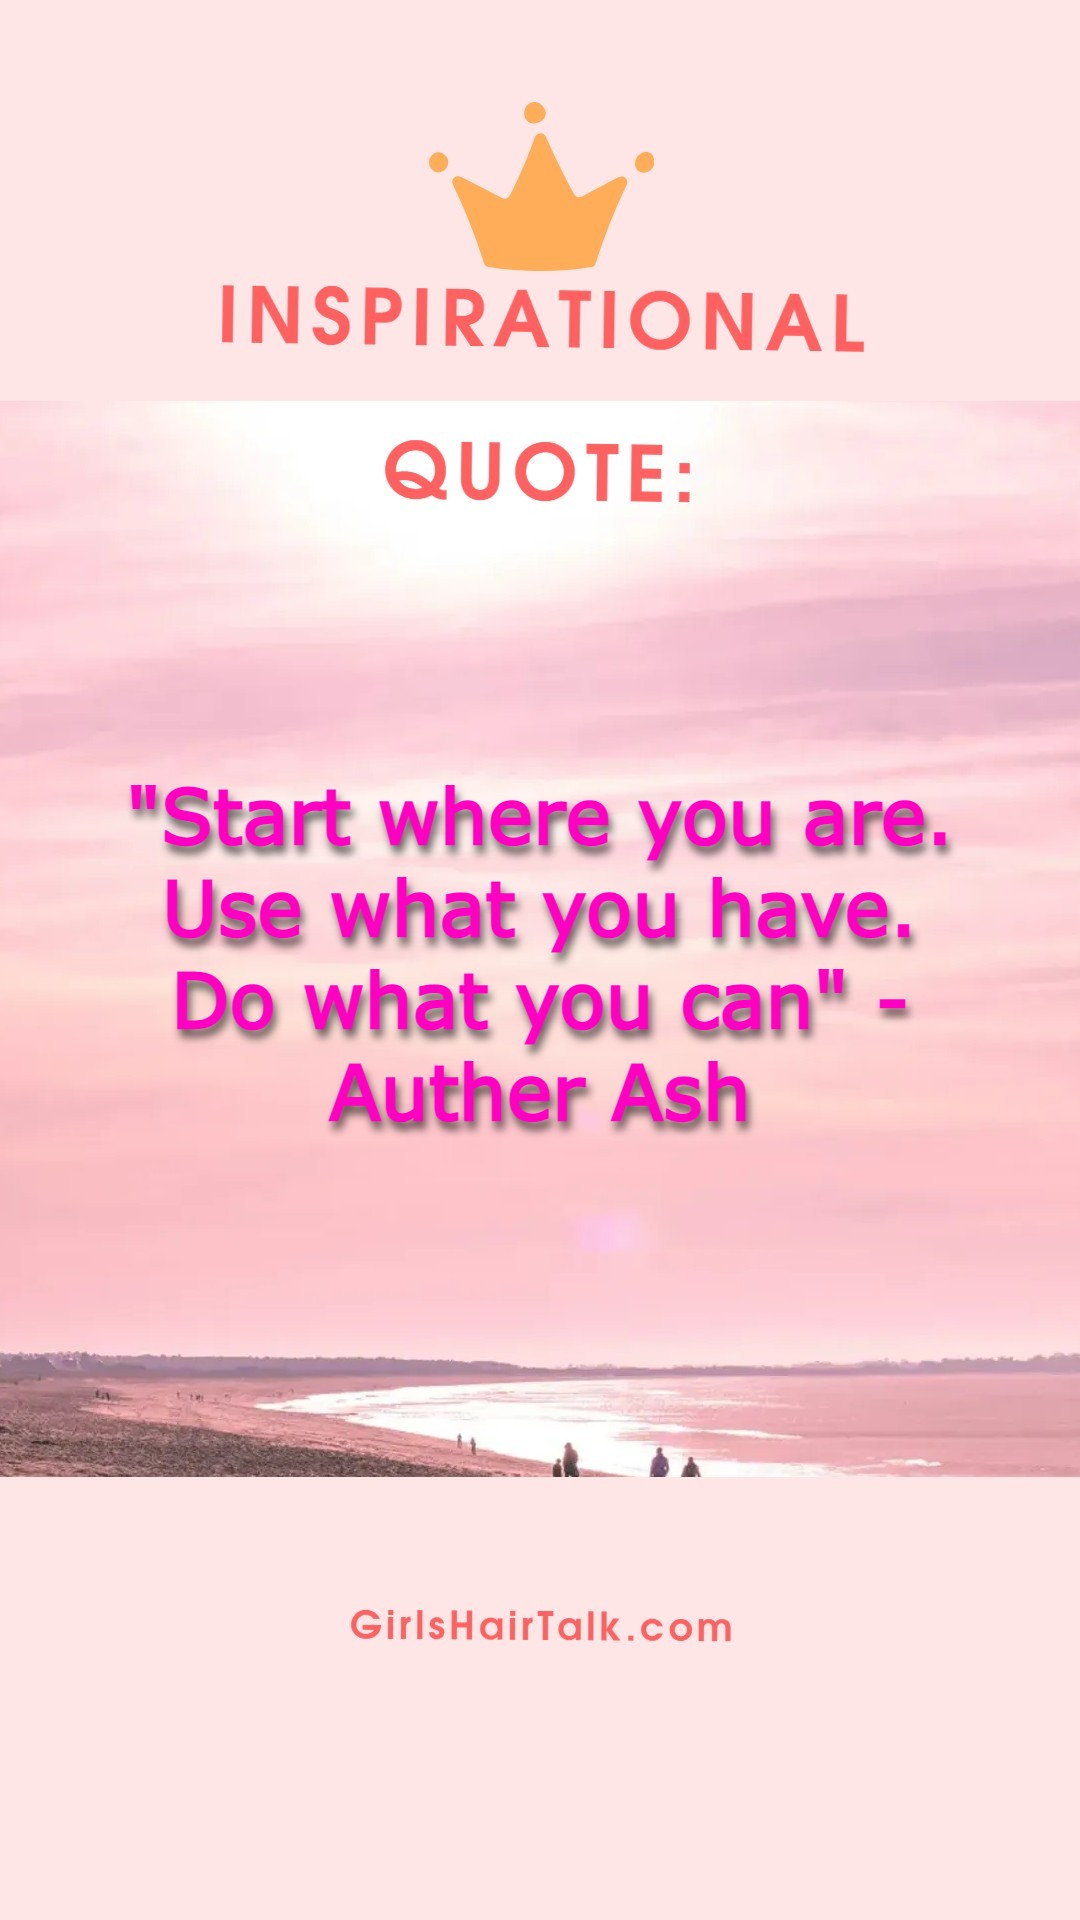 Auther Ash cancer quote